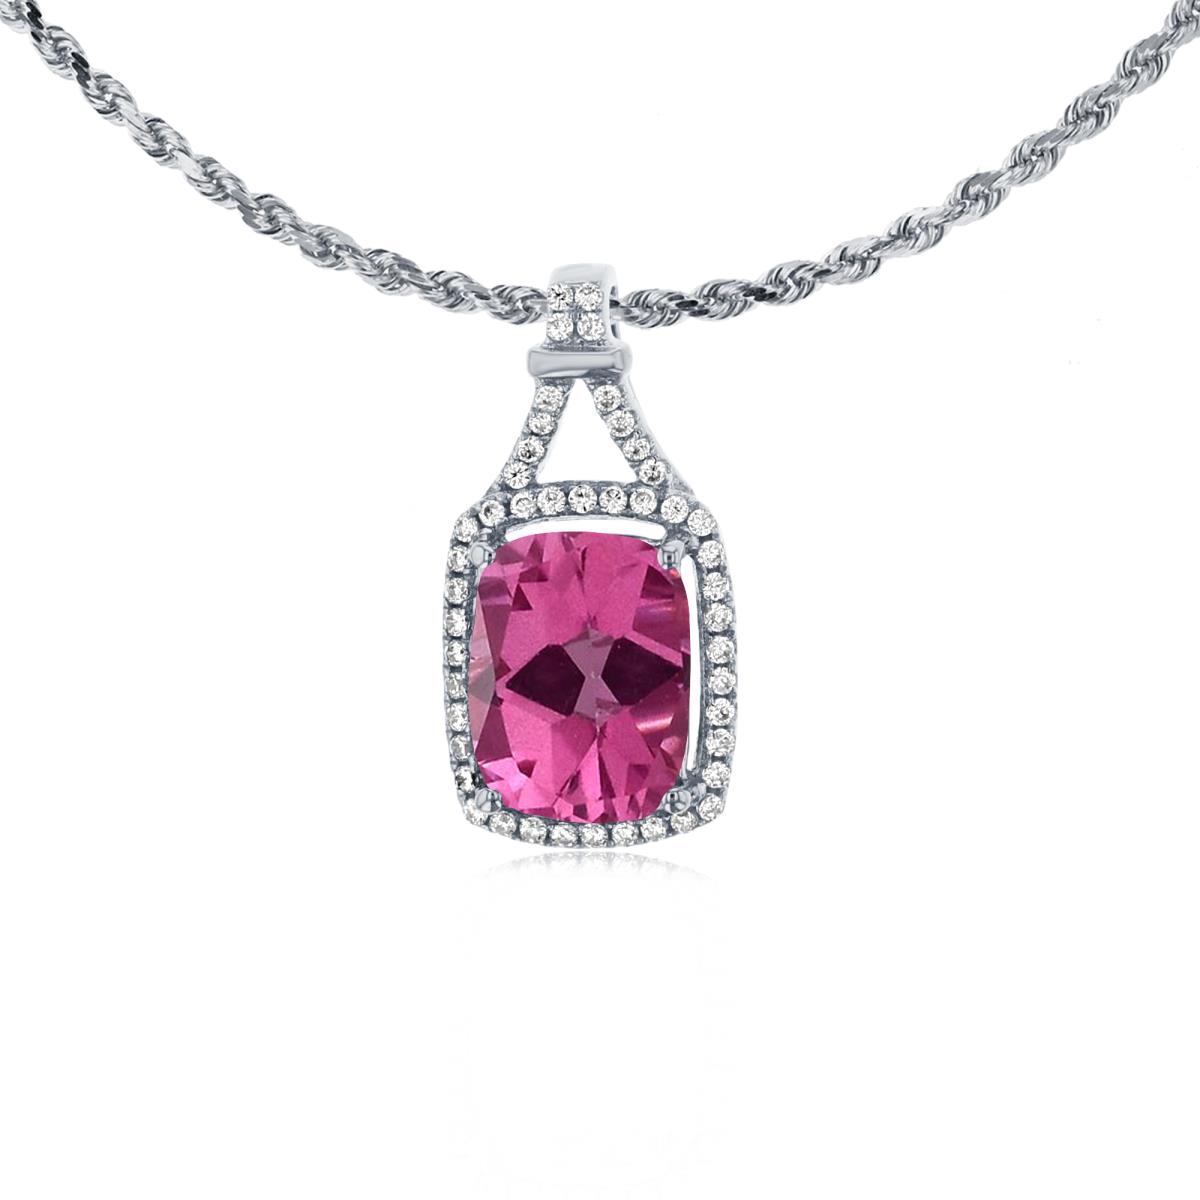 10K White Gold 8x6mm Cushion Pure Pink & 0.13 CTTW Rd Diamonds Halo 18" Rope Chain Necklace